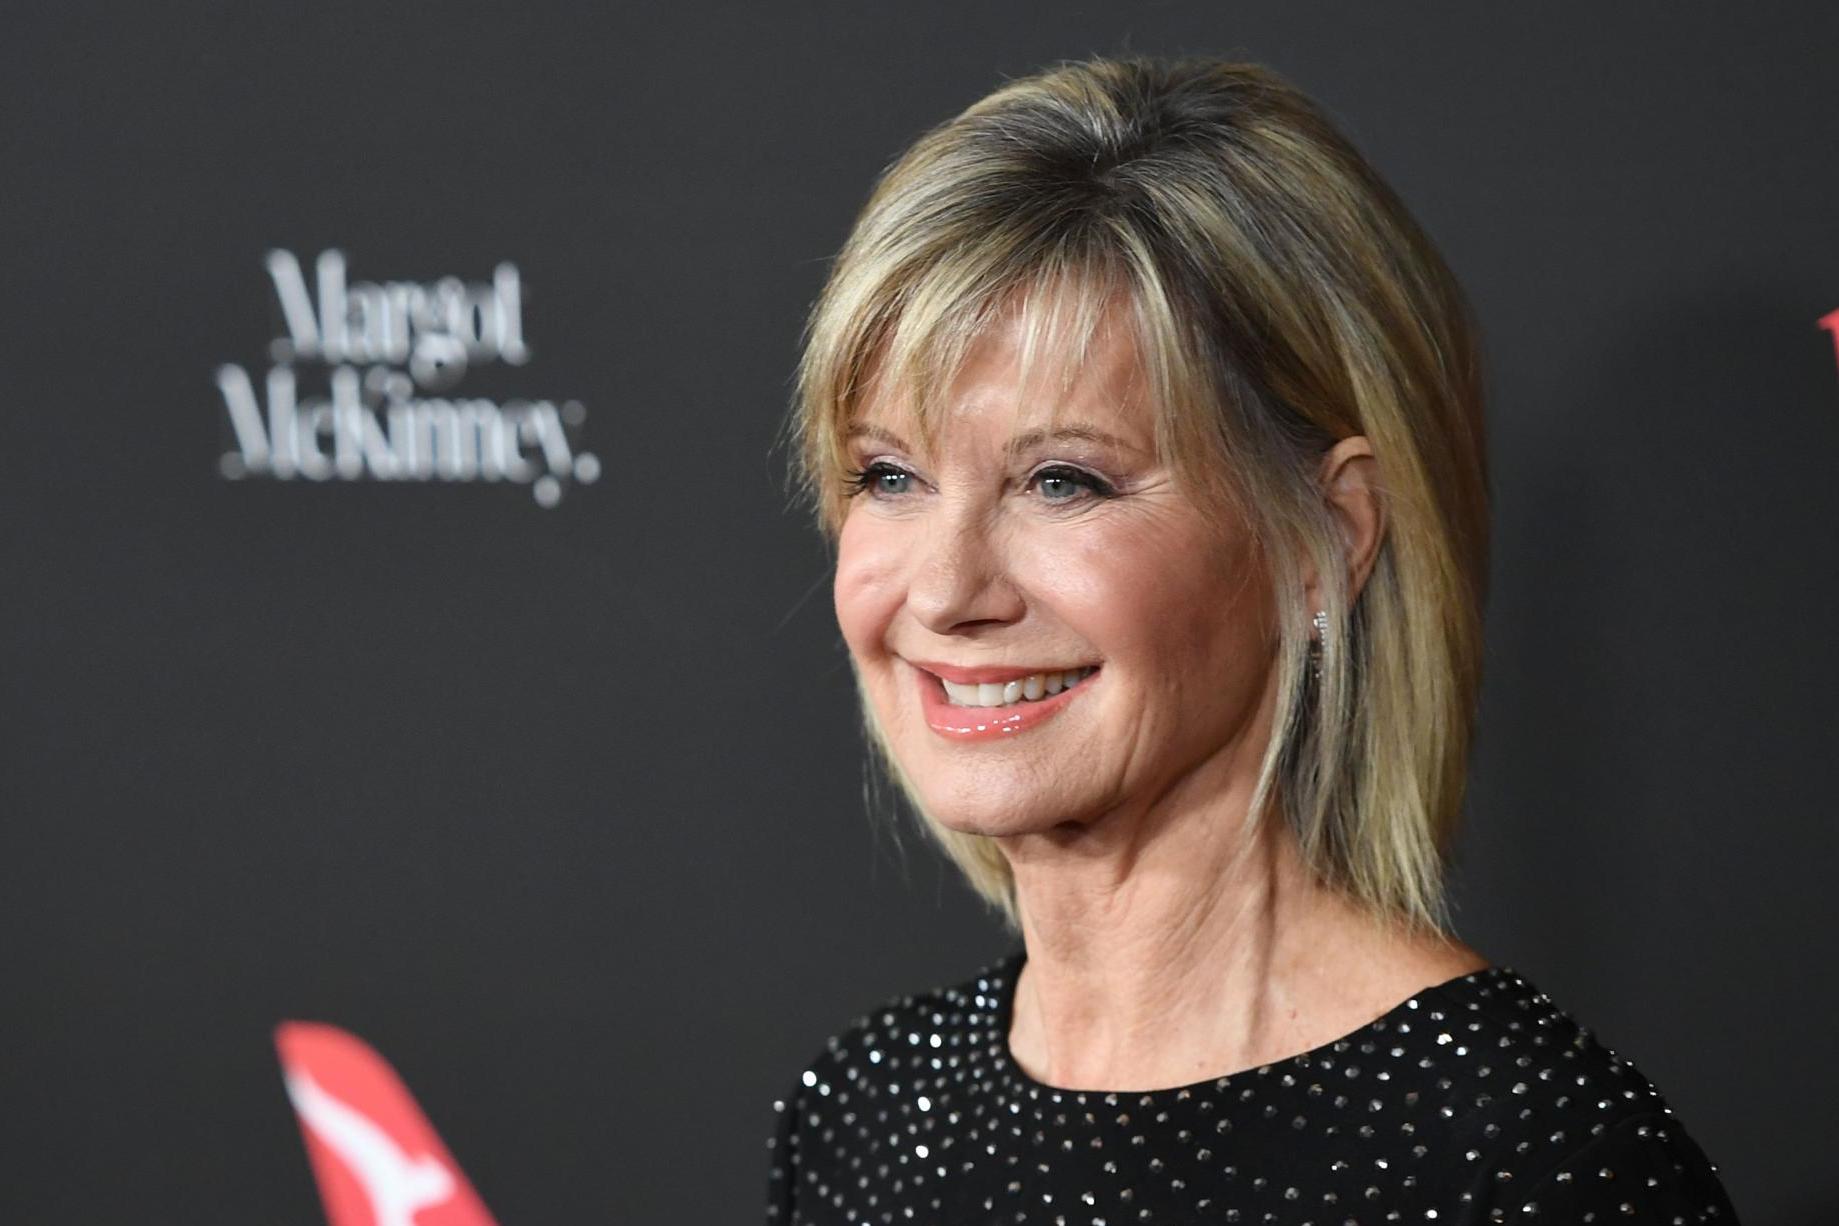 olivia newton-john diagnosed with cancer for a third time